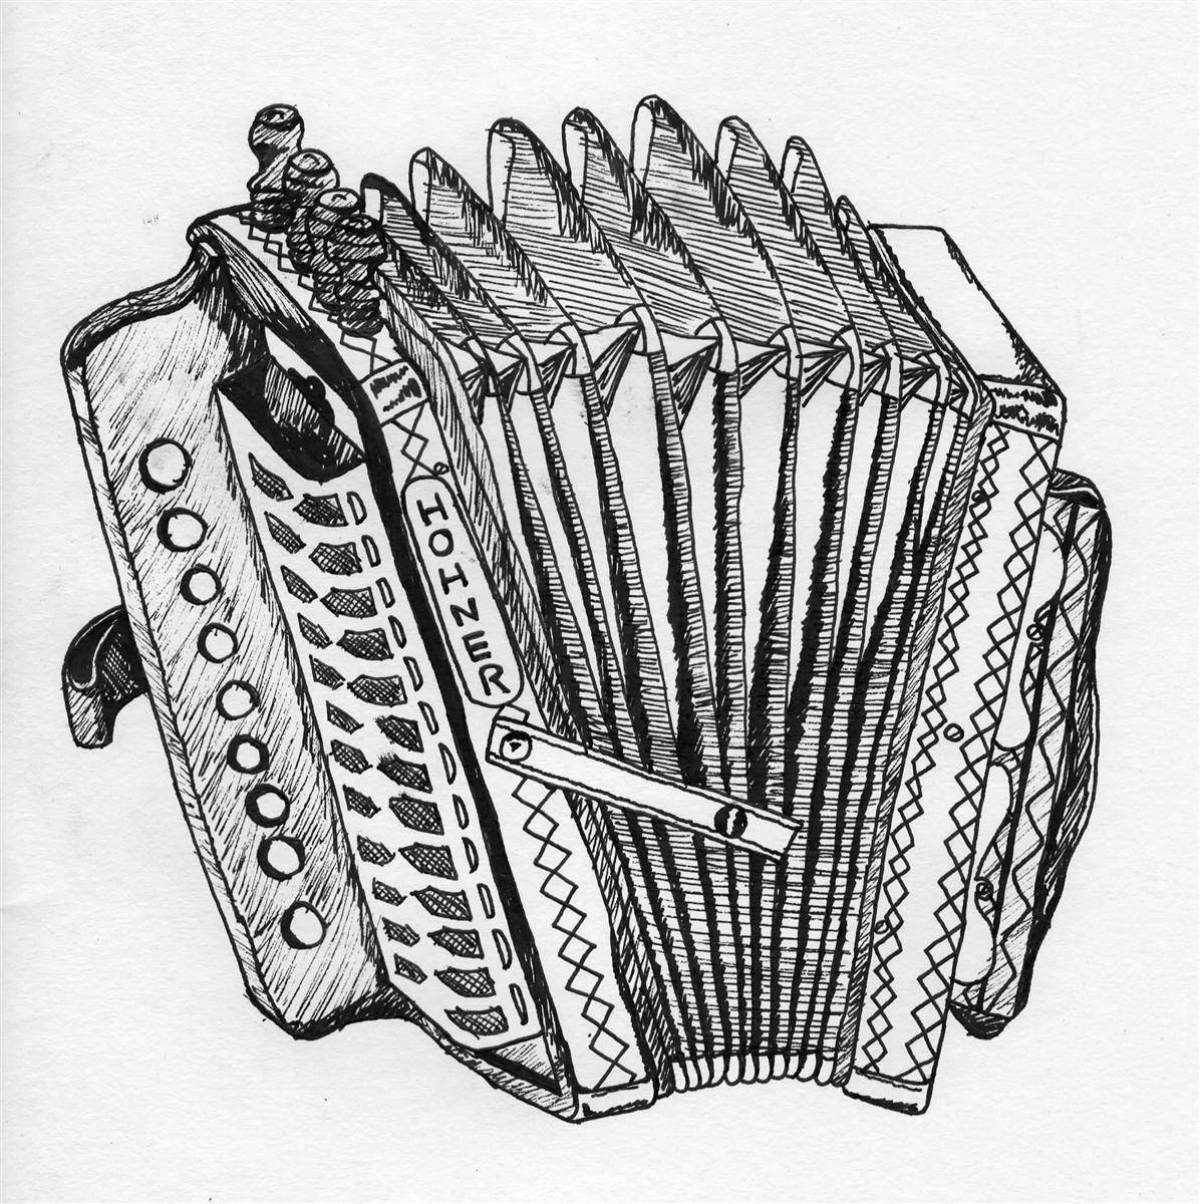 Fun musical instruments for accordion for babies